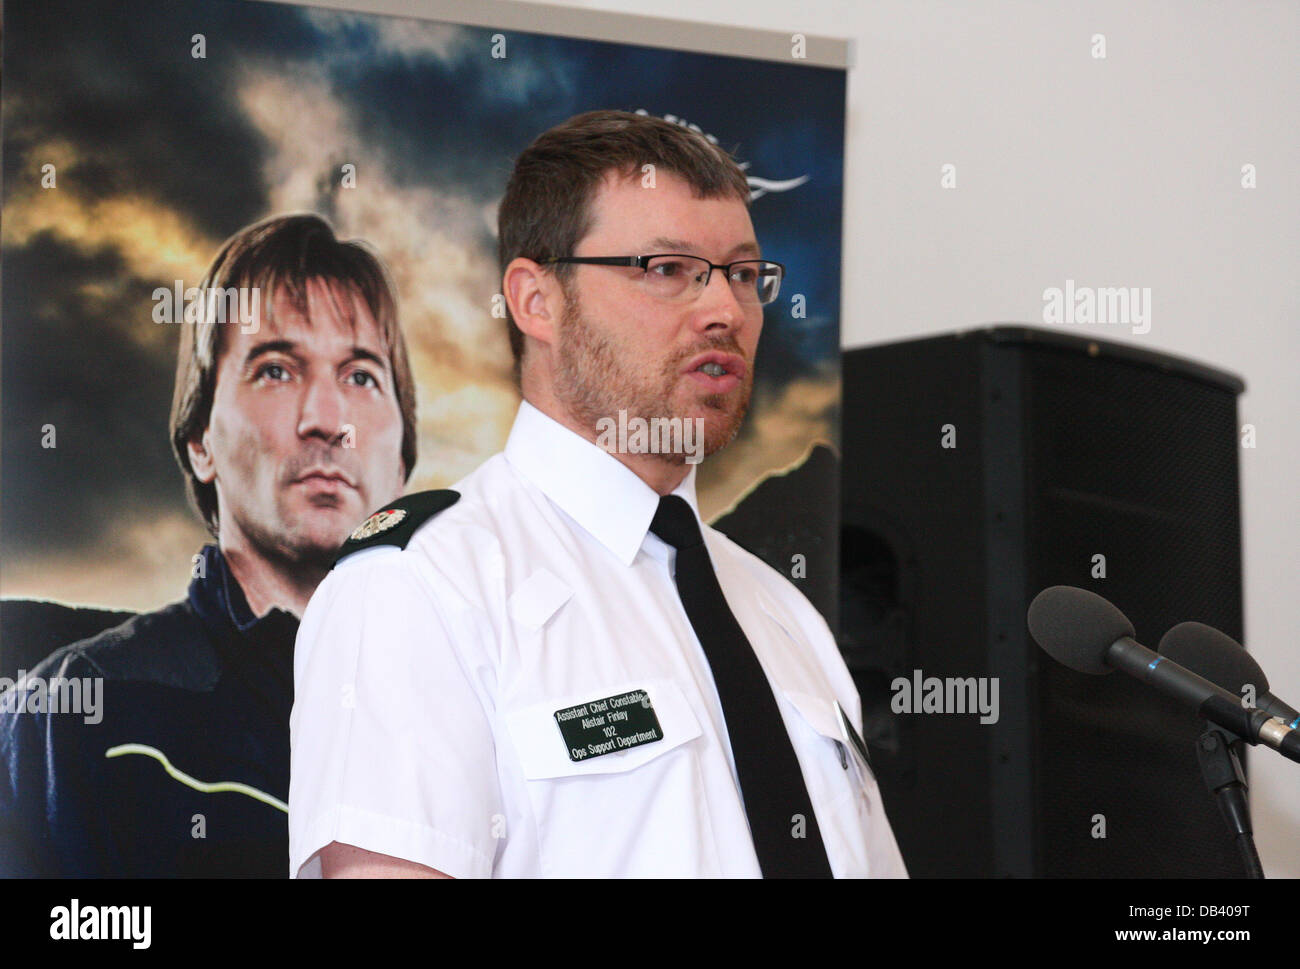 Belfast, Northern Ireland, UK. 23rd July 2013. World Police and Fire Games press conference in the Ulster Hall Belfast - Assistant Chief Constable Alistair Finlay Credit:  Kevin Scott/Alamy Live News Stock Photo